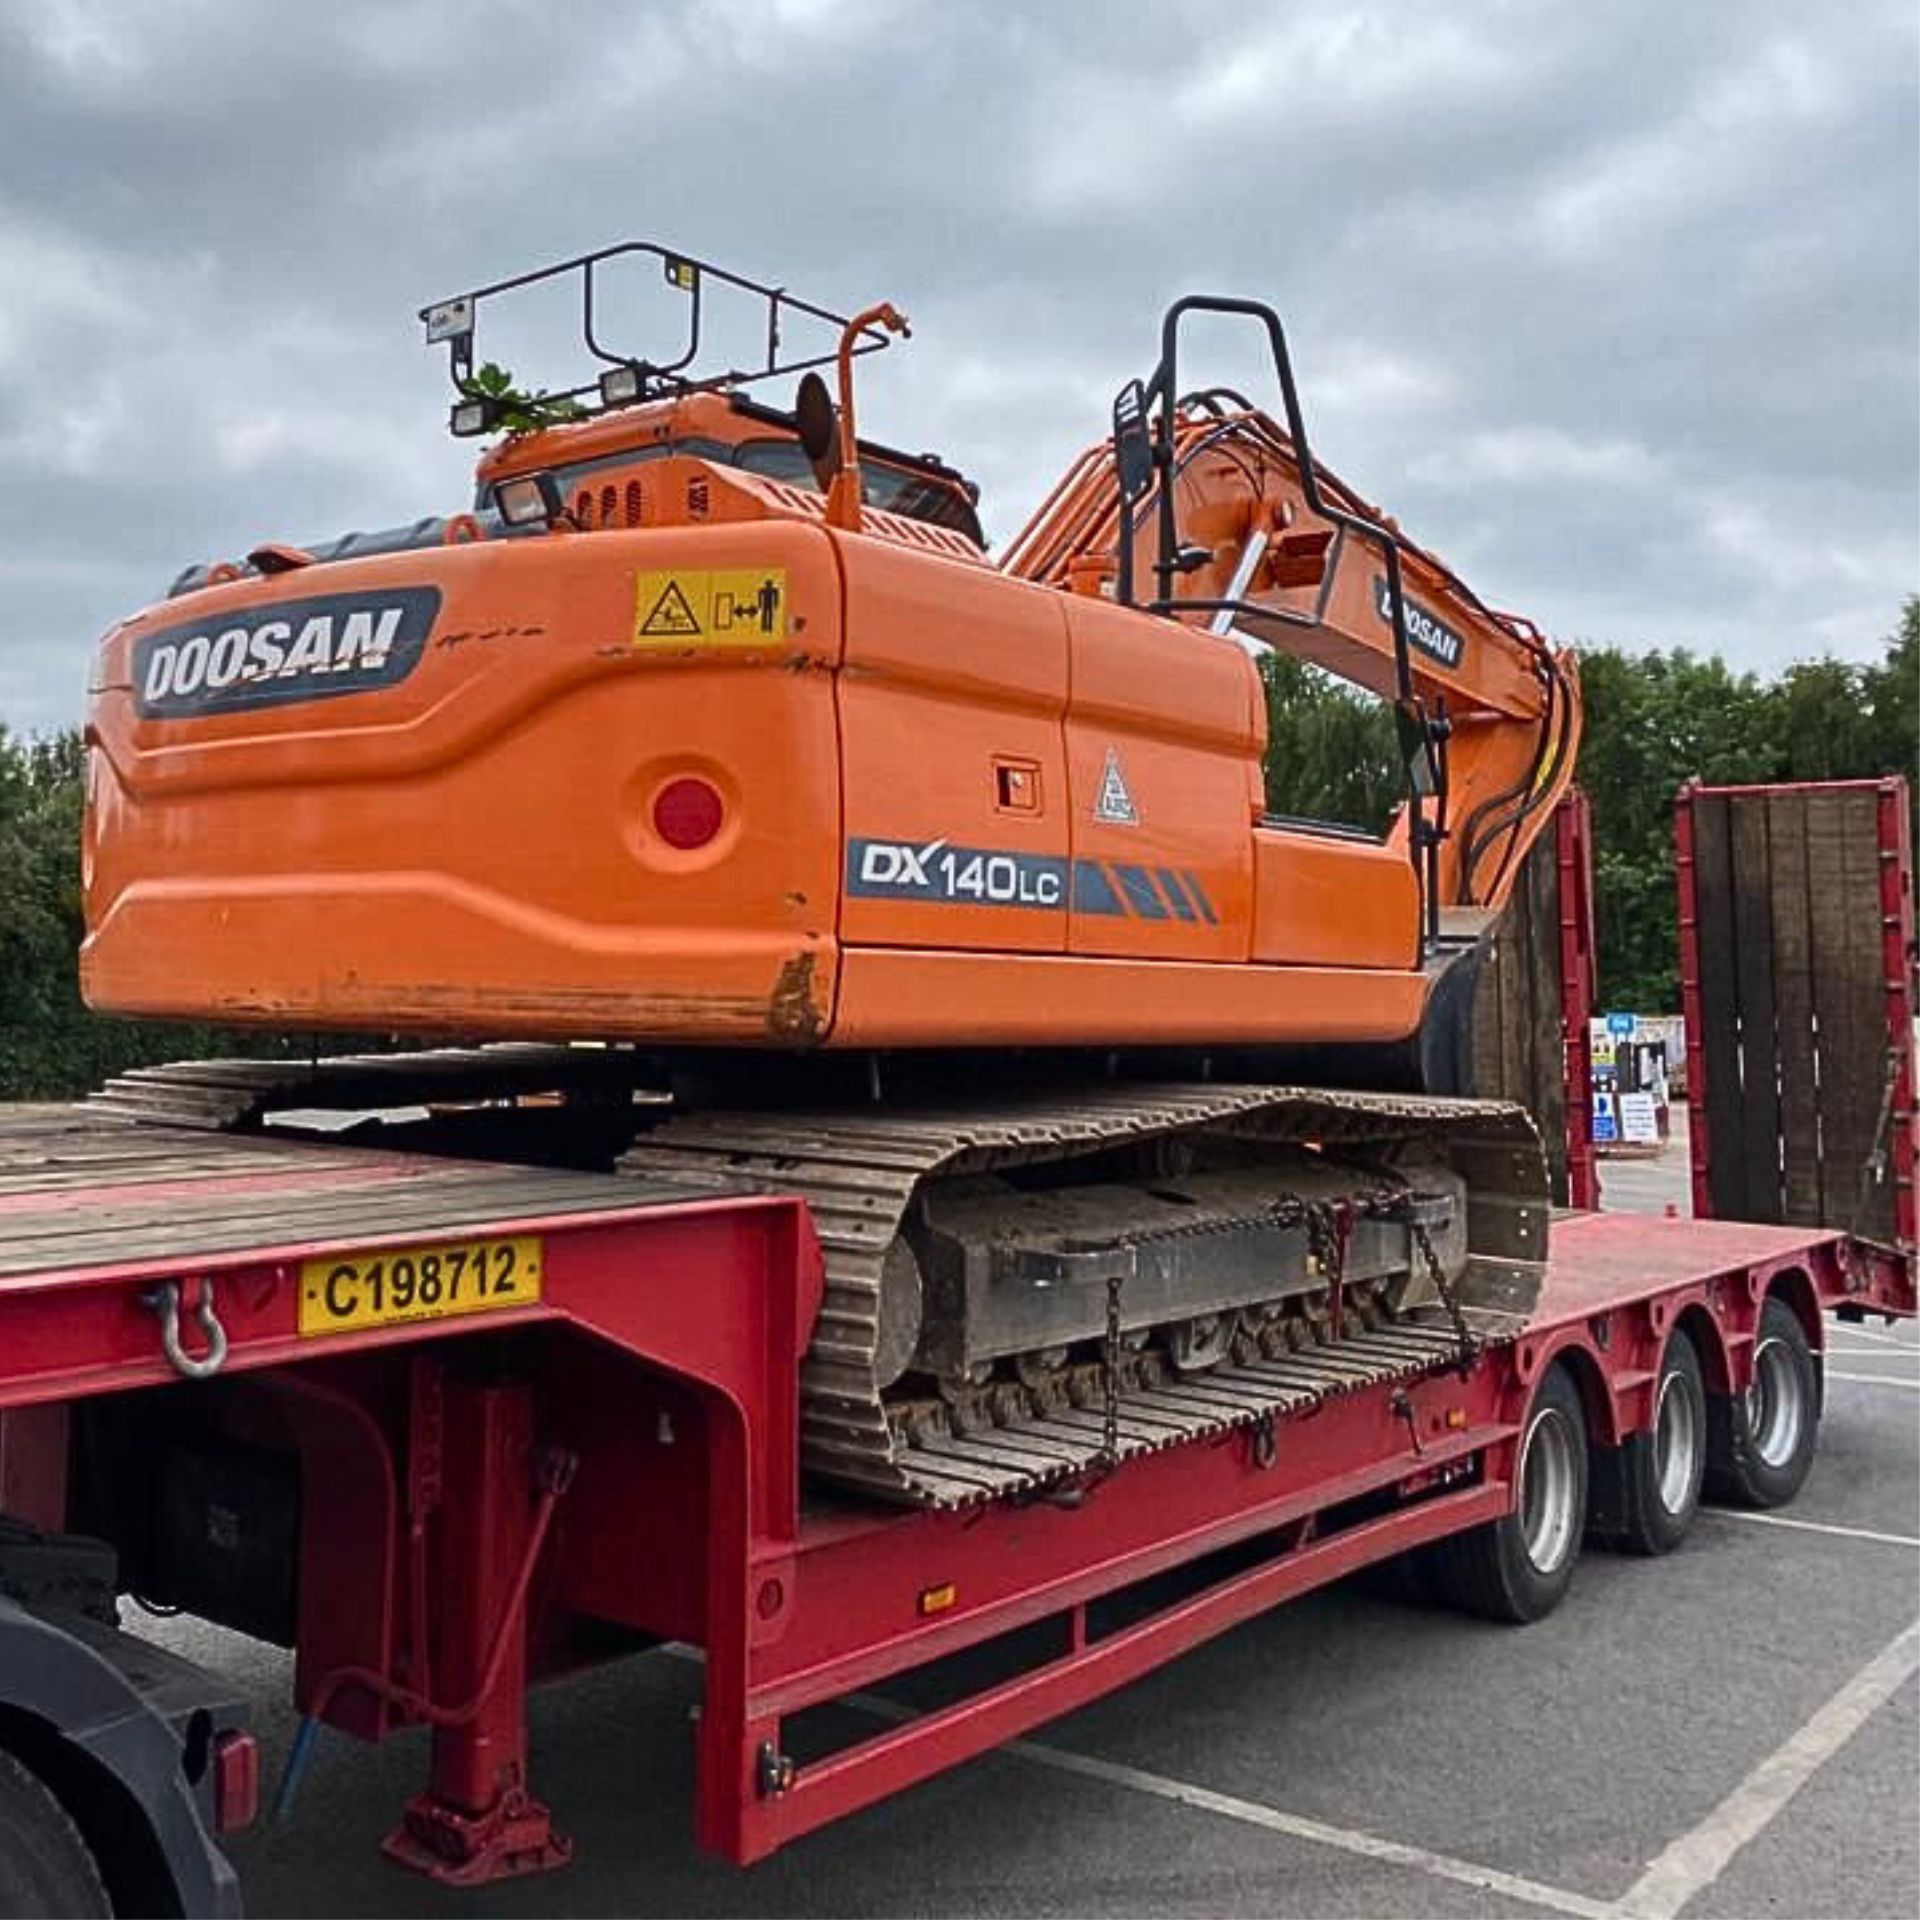 A small digger being transported by lorry